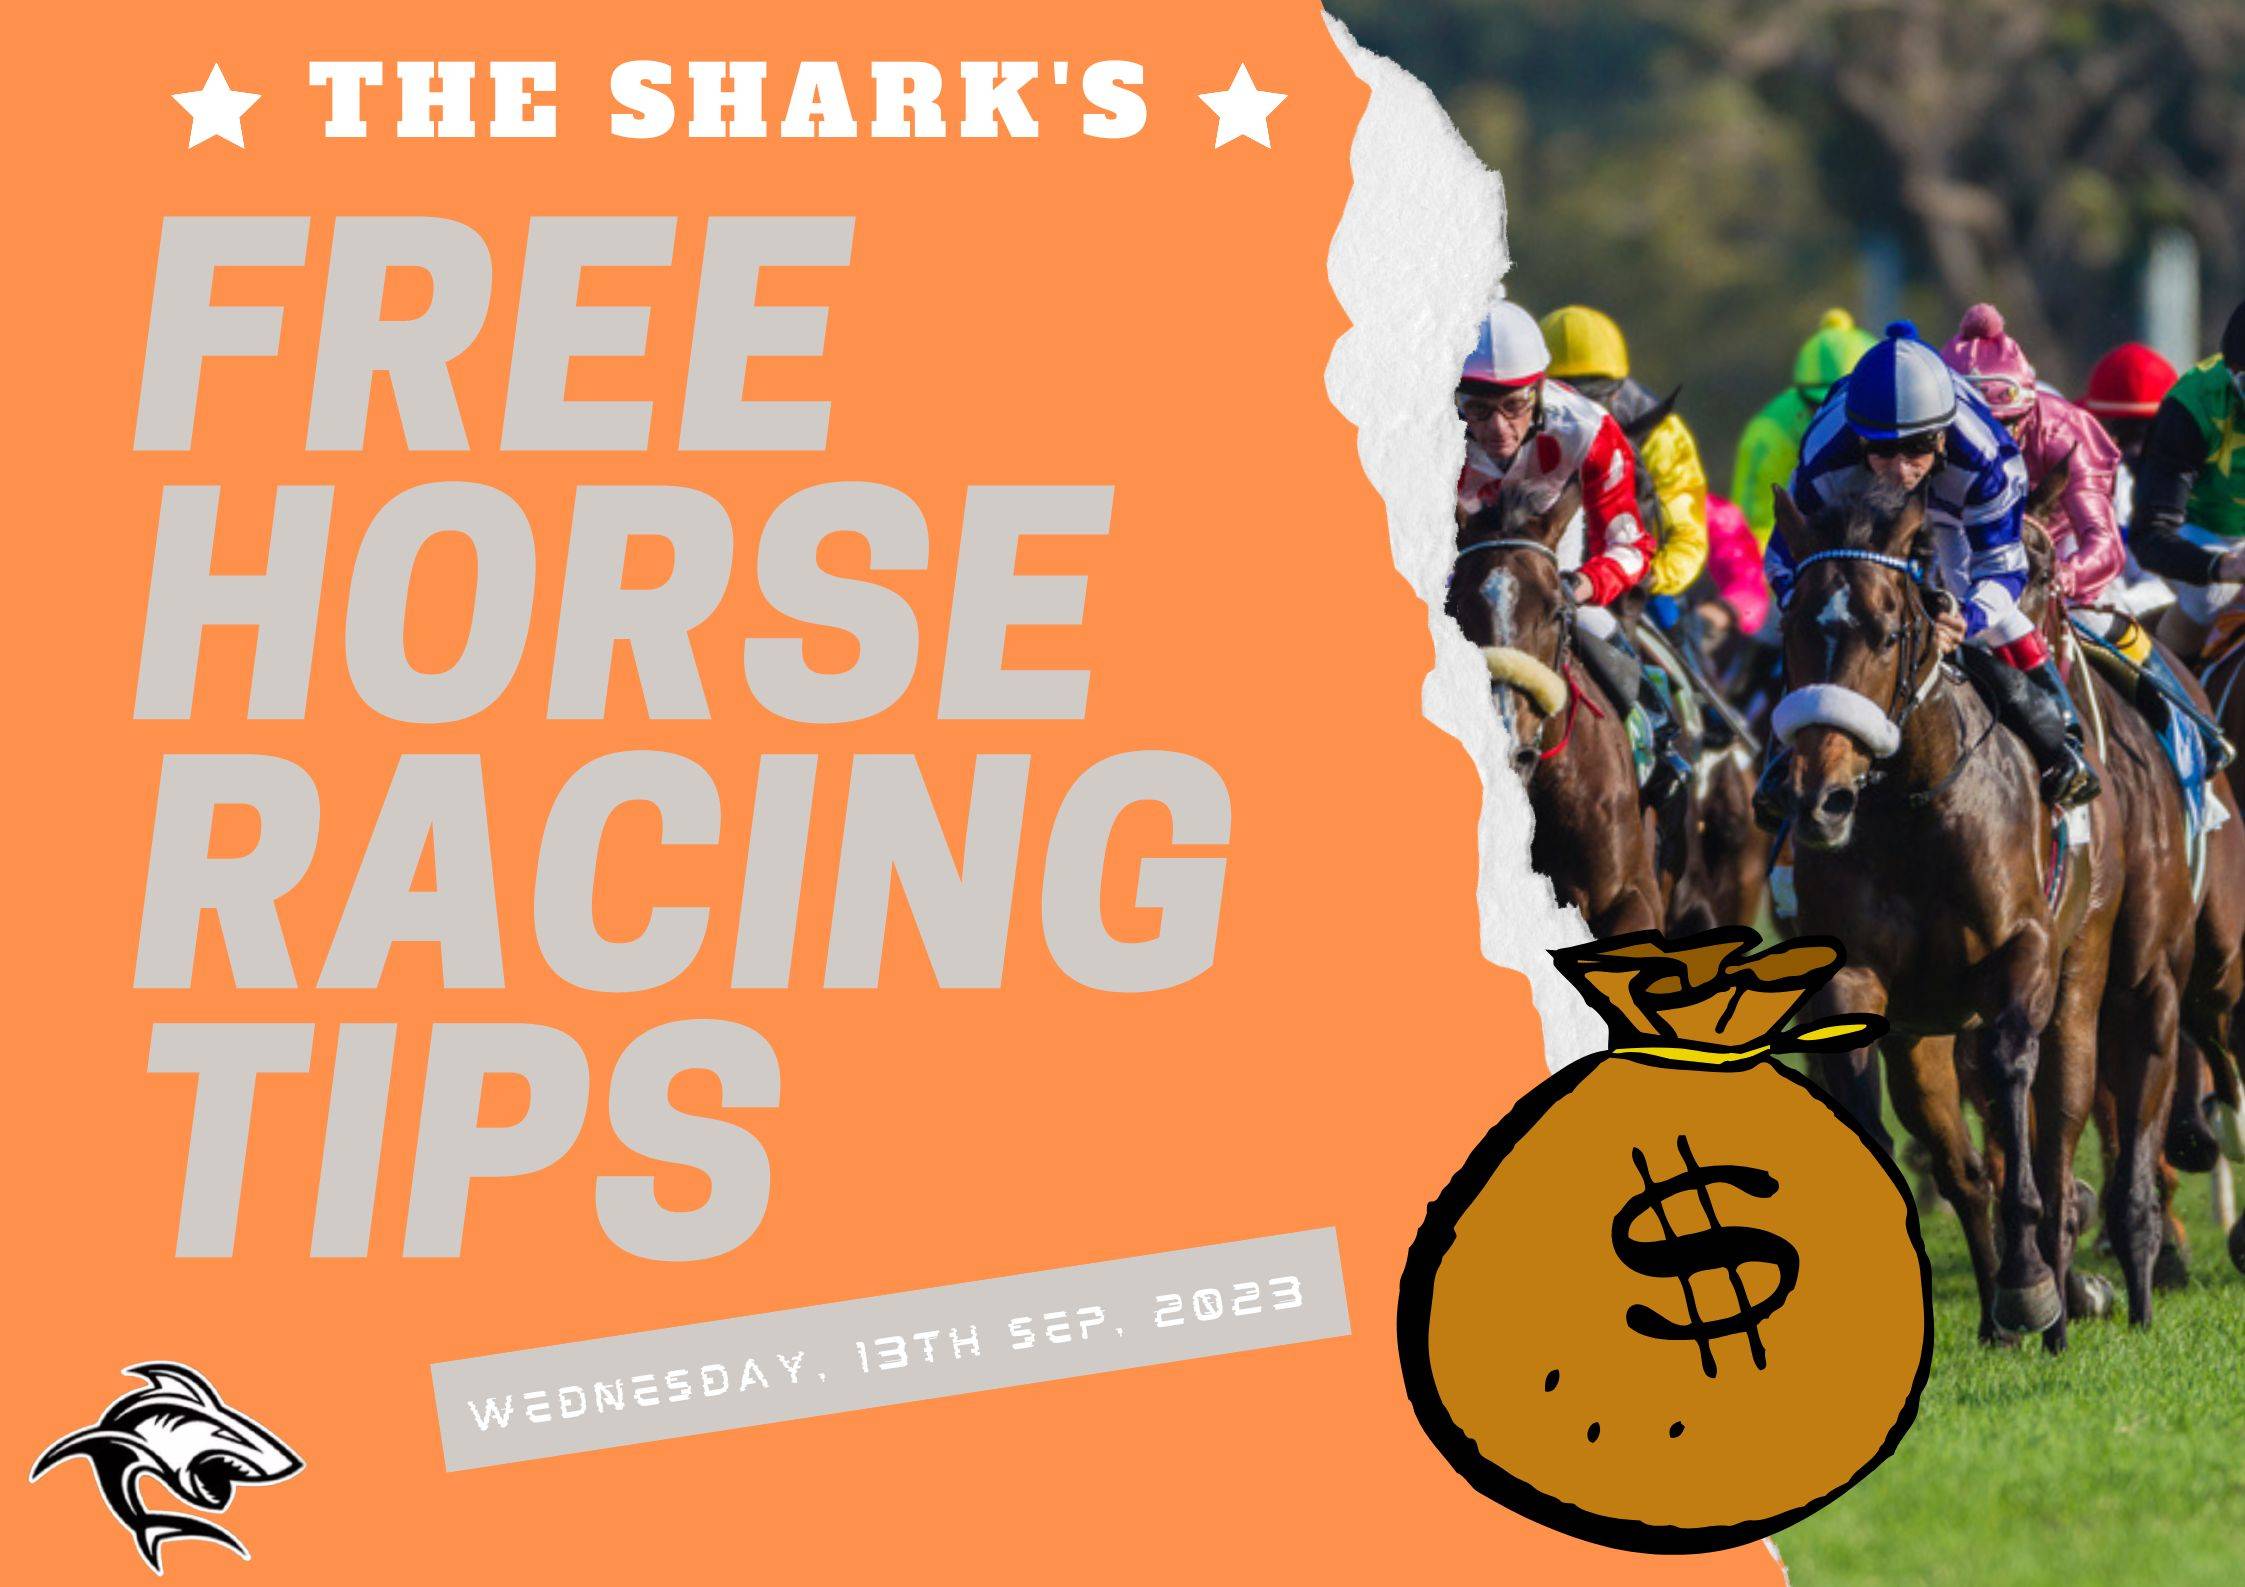 Free Horse Racing Tips - 13th Sep